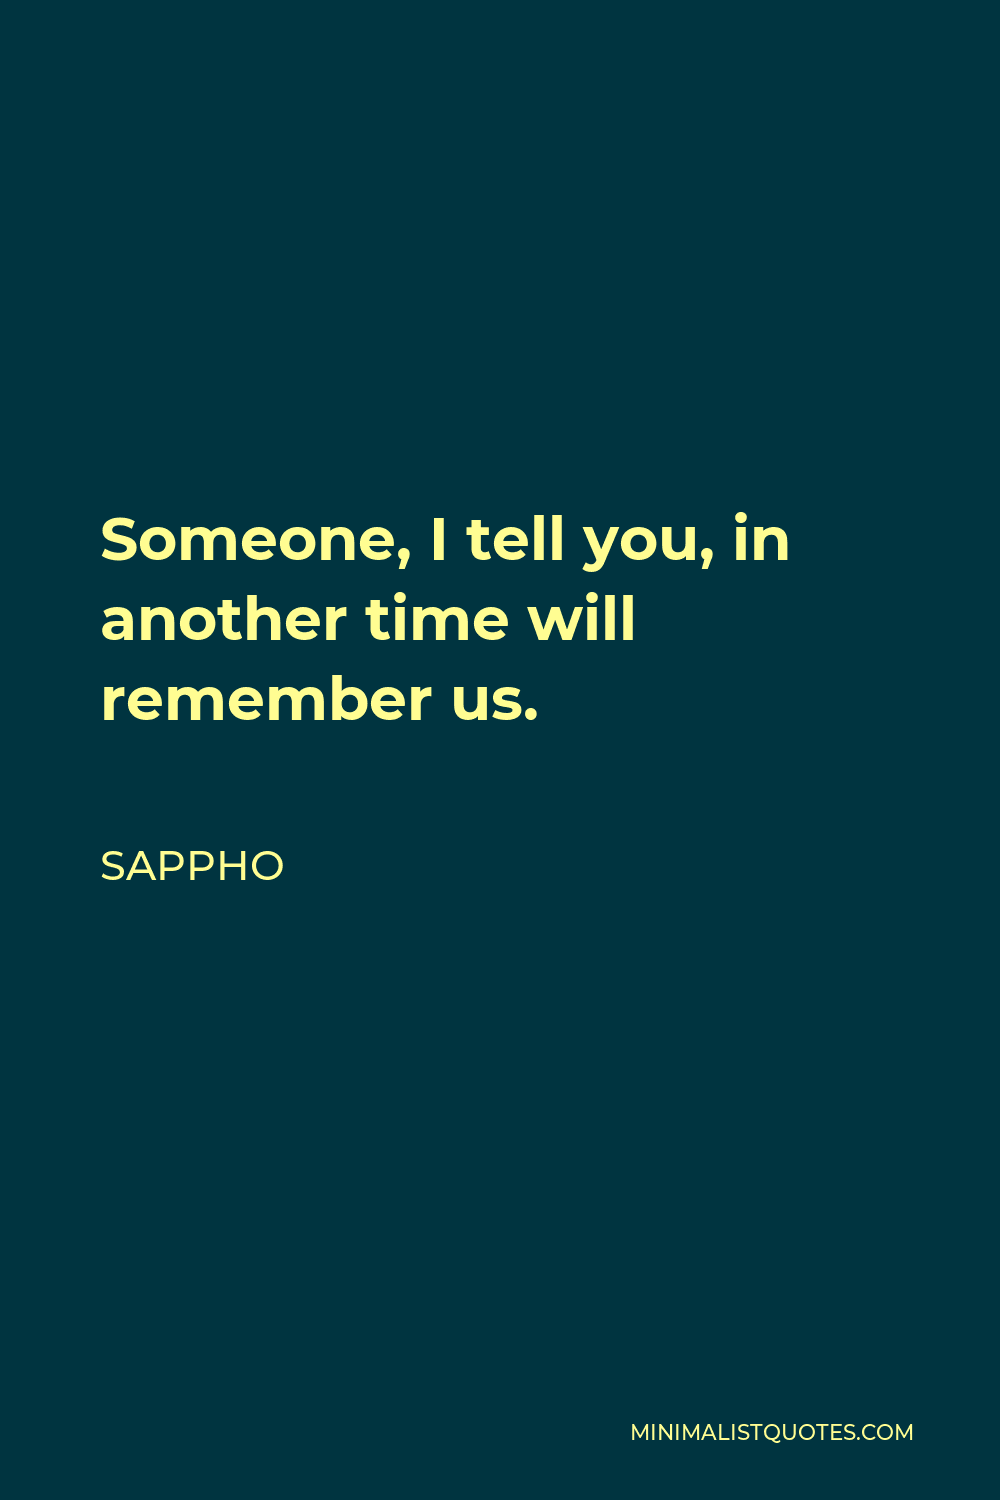 Sappho Quote: Someone, I tell you, in another time will remember us.